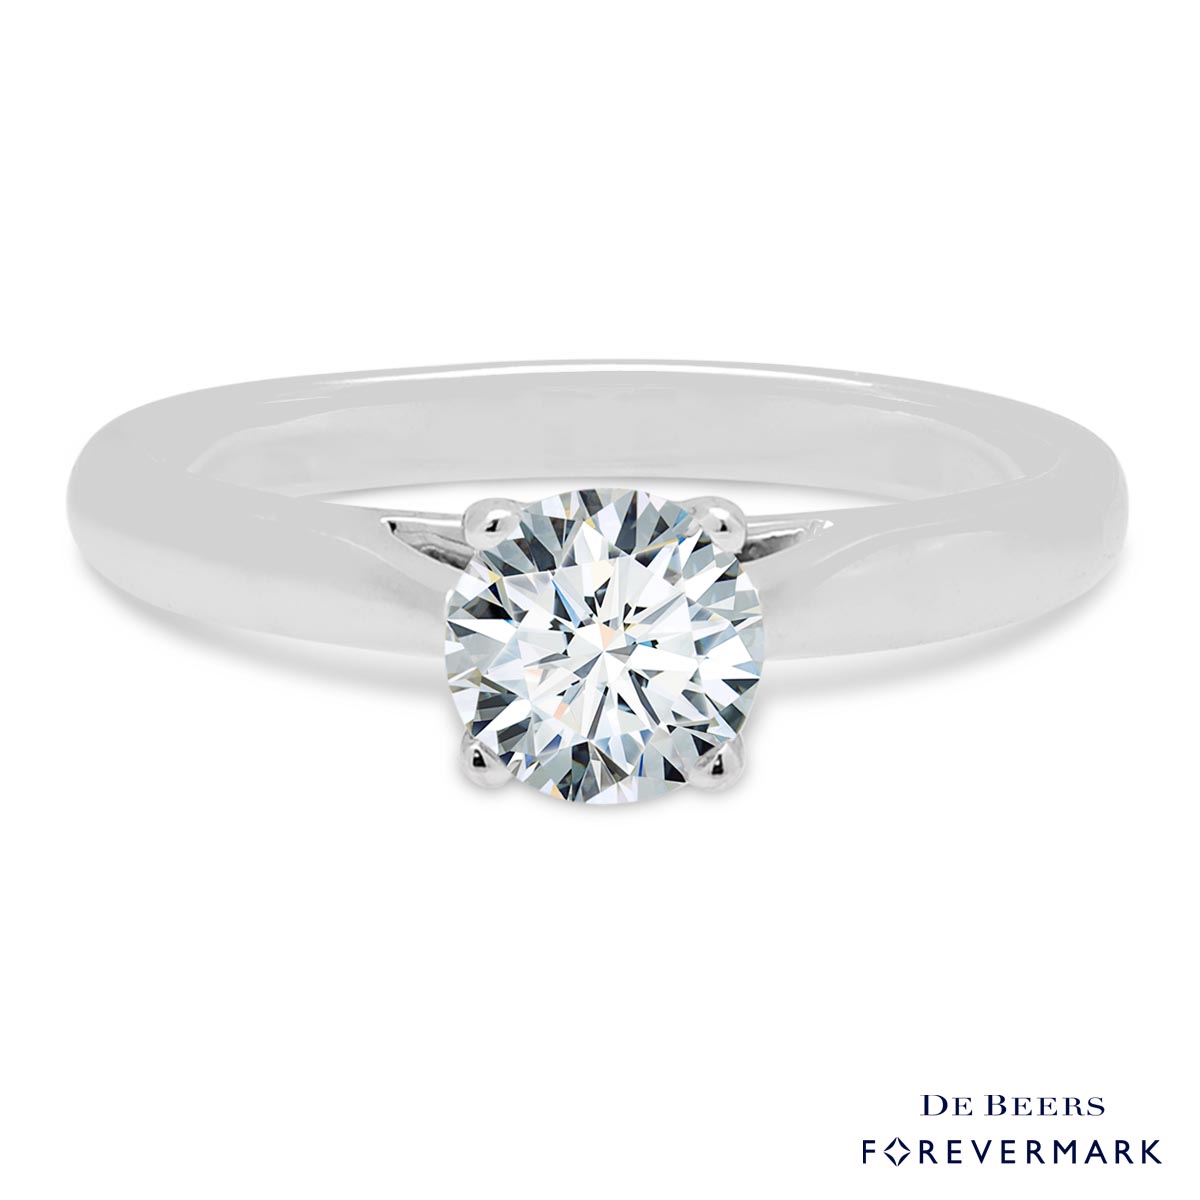 De Beers Forevermark Diamond Solitaire Engagement Ring in 14kt White Gold (3/4ct tw)